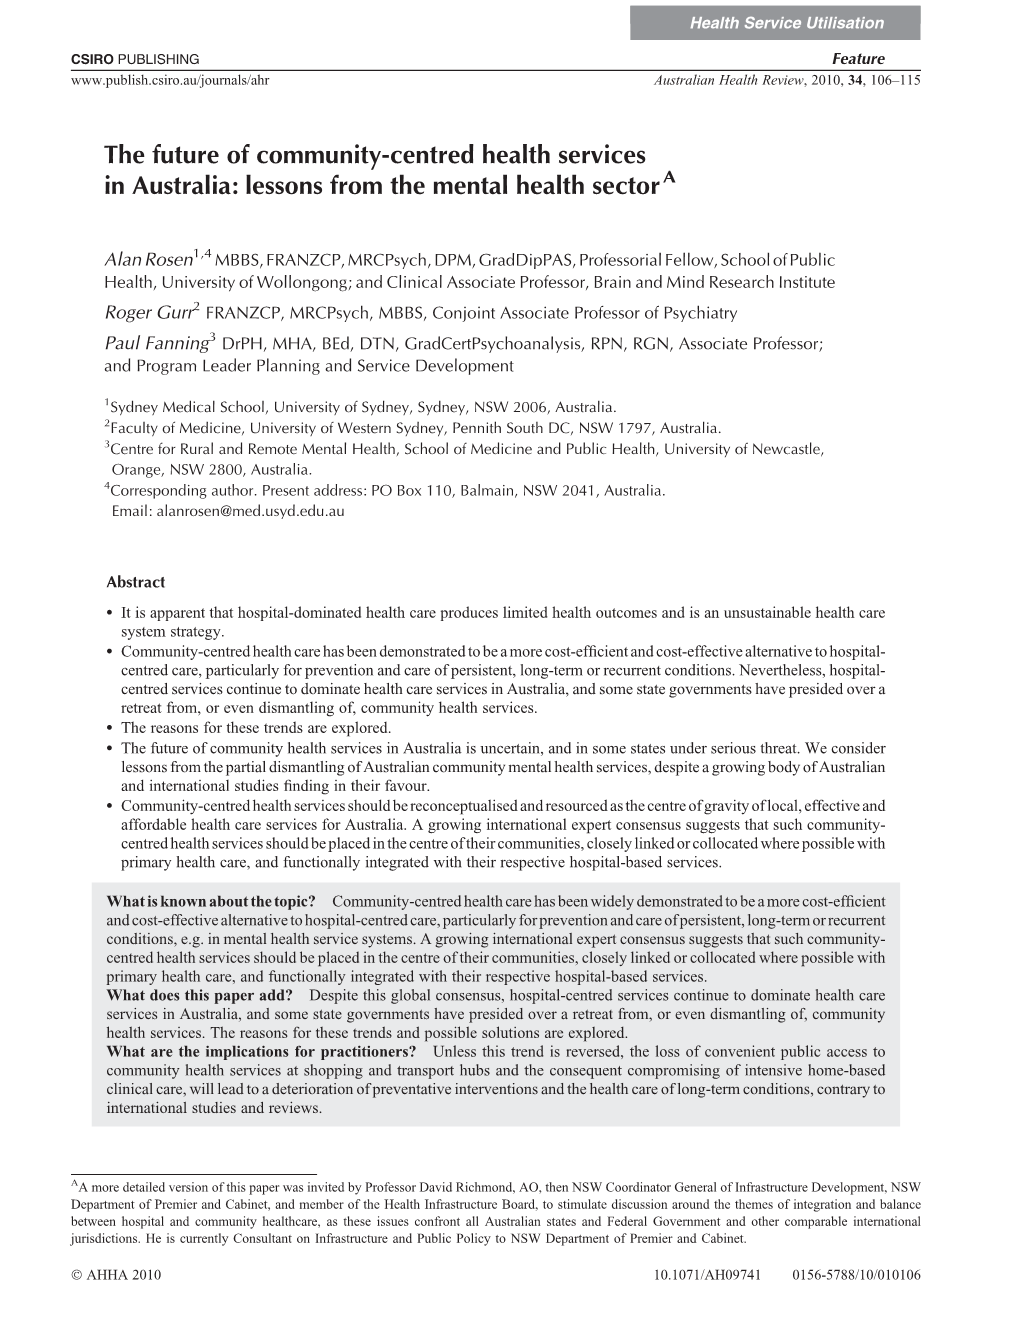 The Future of Community-Centred Health Services in Australia: Lessons from the Mental Health Sector A